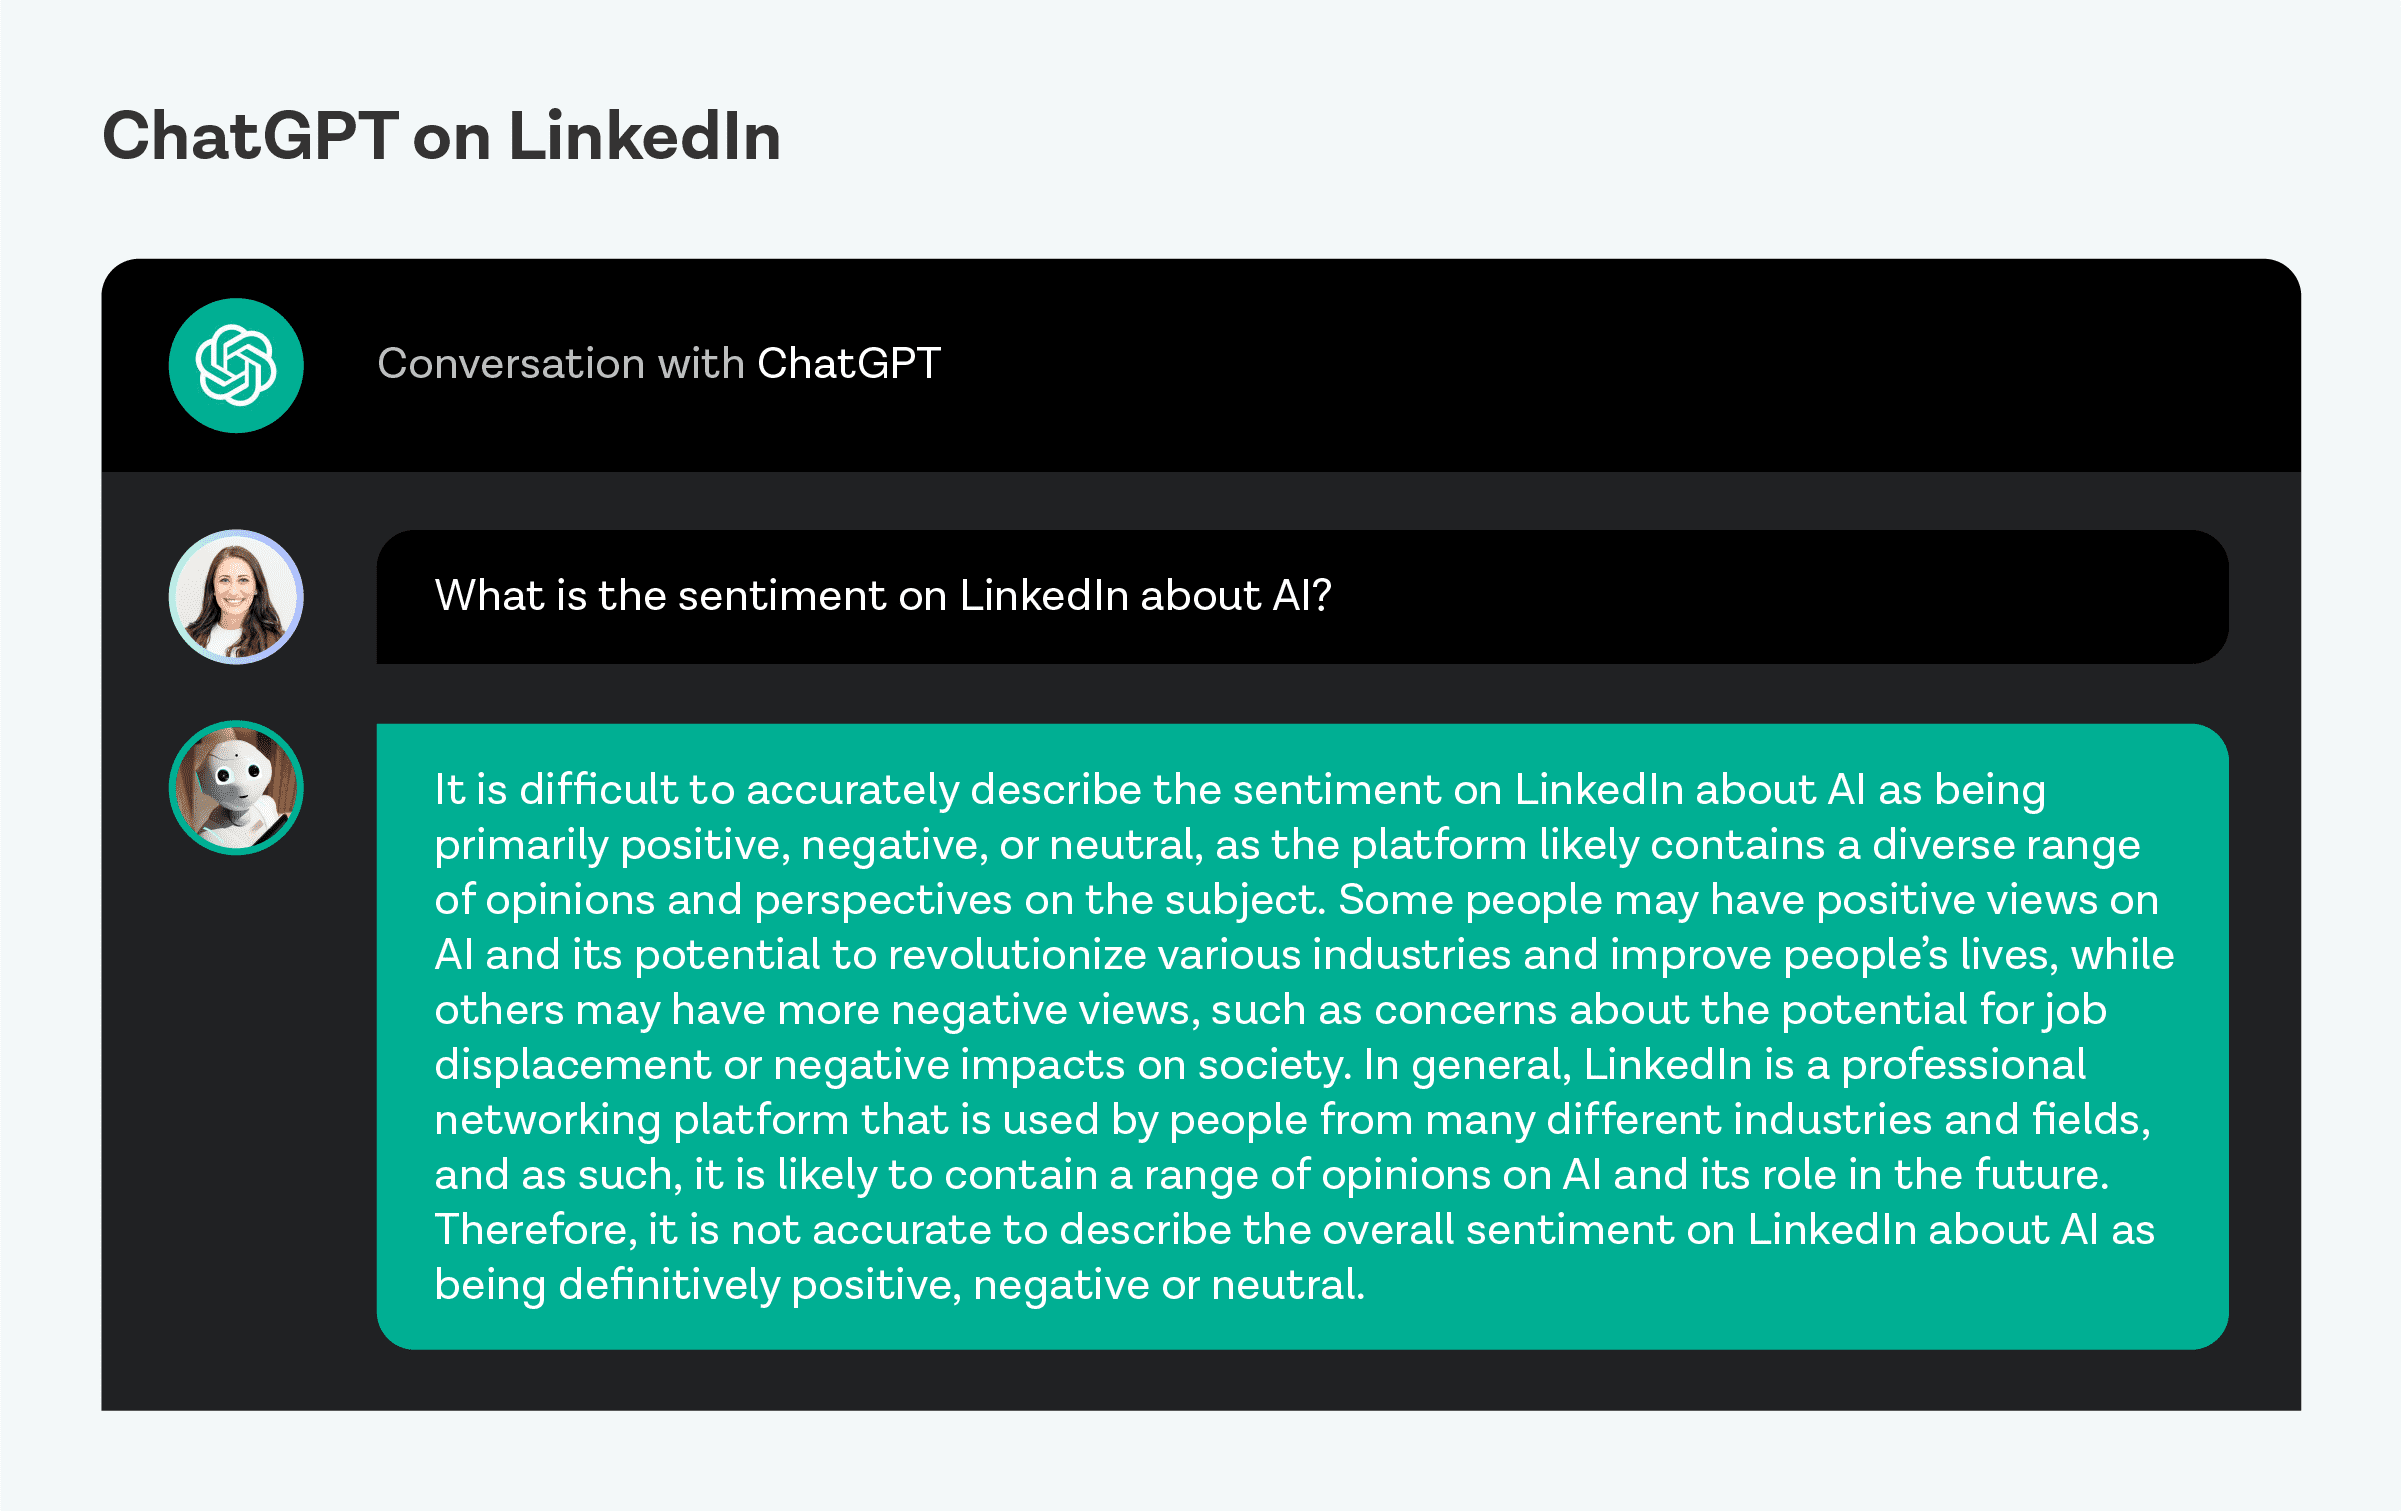 “It is difficult to accurately describe the sentiment on LinkedIn about AI as being primarily positive, negative, or neutral, as the platform likely contains a diverse range of opinions and perspectives on the subject. Some people may have positive views on AI and its potential to revolutionize various industries and improve people’s lives, while others may have more negative views, such as concerns about the potential for job displacement or negative impacts on society. In general, LinkedIn is a professional networking platform that is used by people from many different industries and fields, and as such, it is likely to contain a range of opinions on AI and its role in the future. Therefore, it is not accurate to describe the overall sentiment on LinkedIn about AI as being definitively positive, negative, or neutral.”